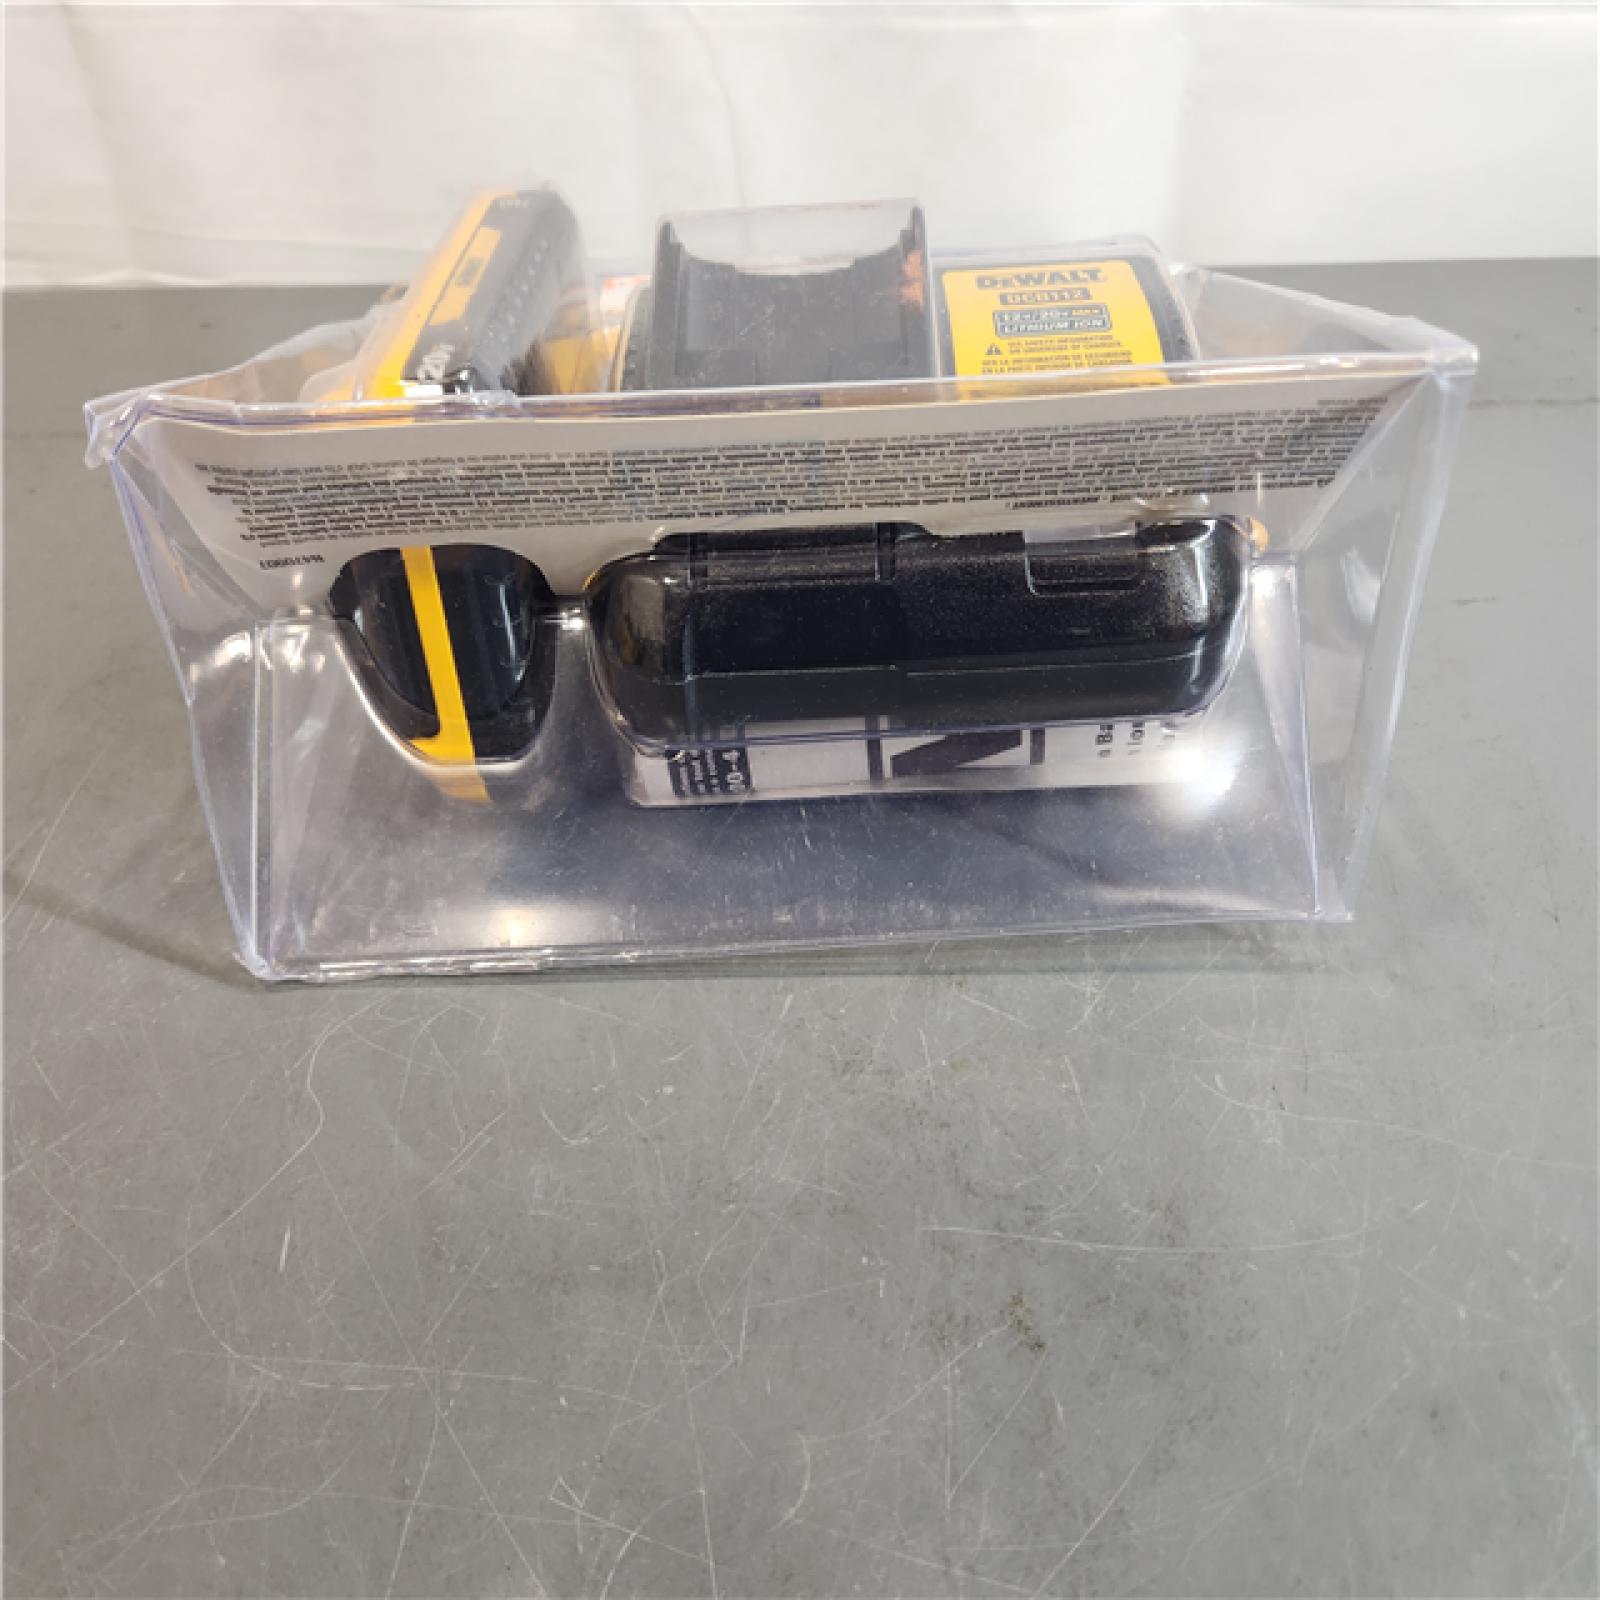 AS-IS DEWALT 20-Volt MAX Lithium-Ion Battery Pack 3.0Ah with Charger